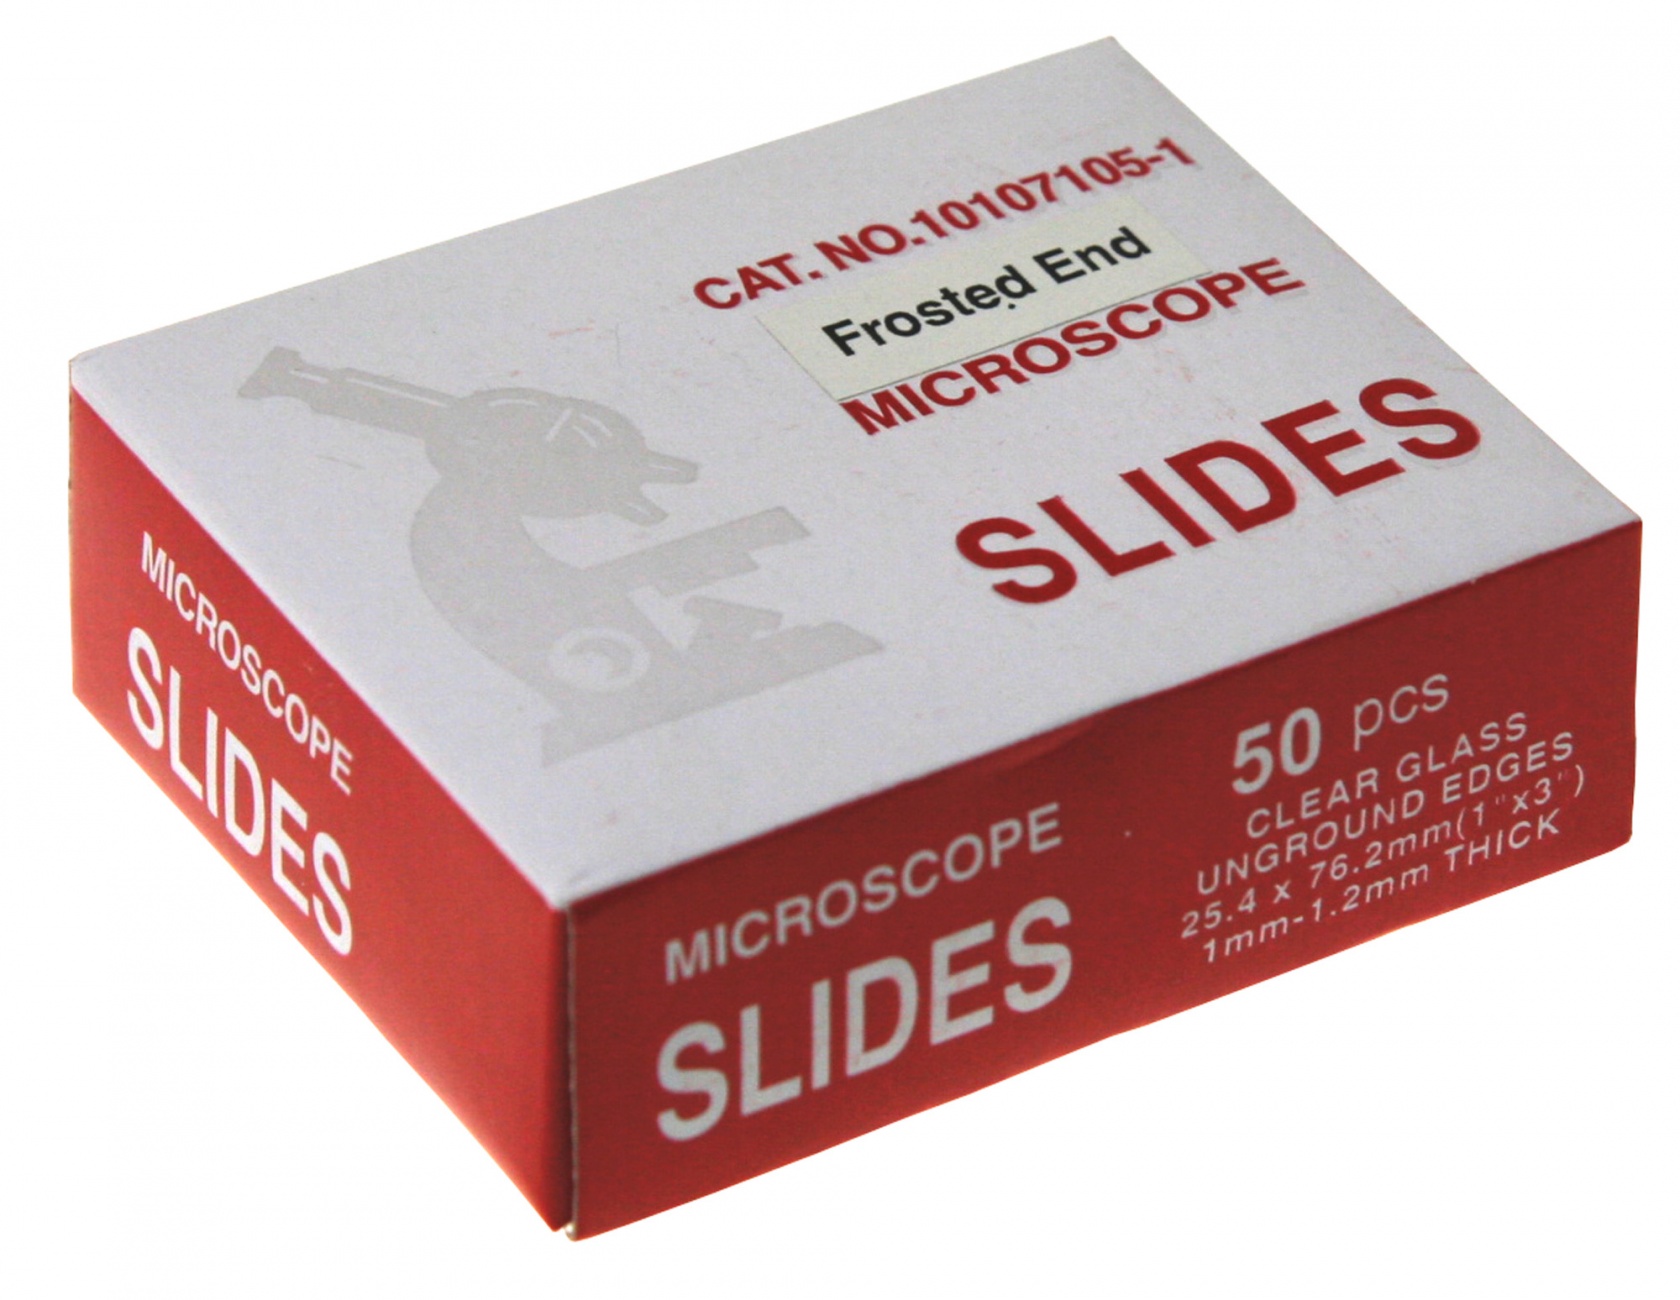 Microscope Slides Cut Edge Frosted Pk 50